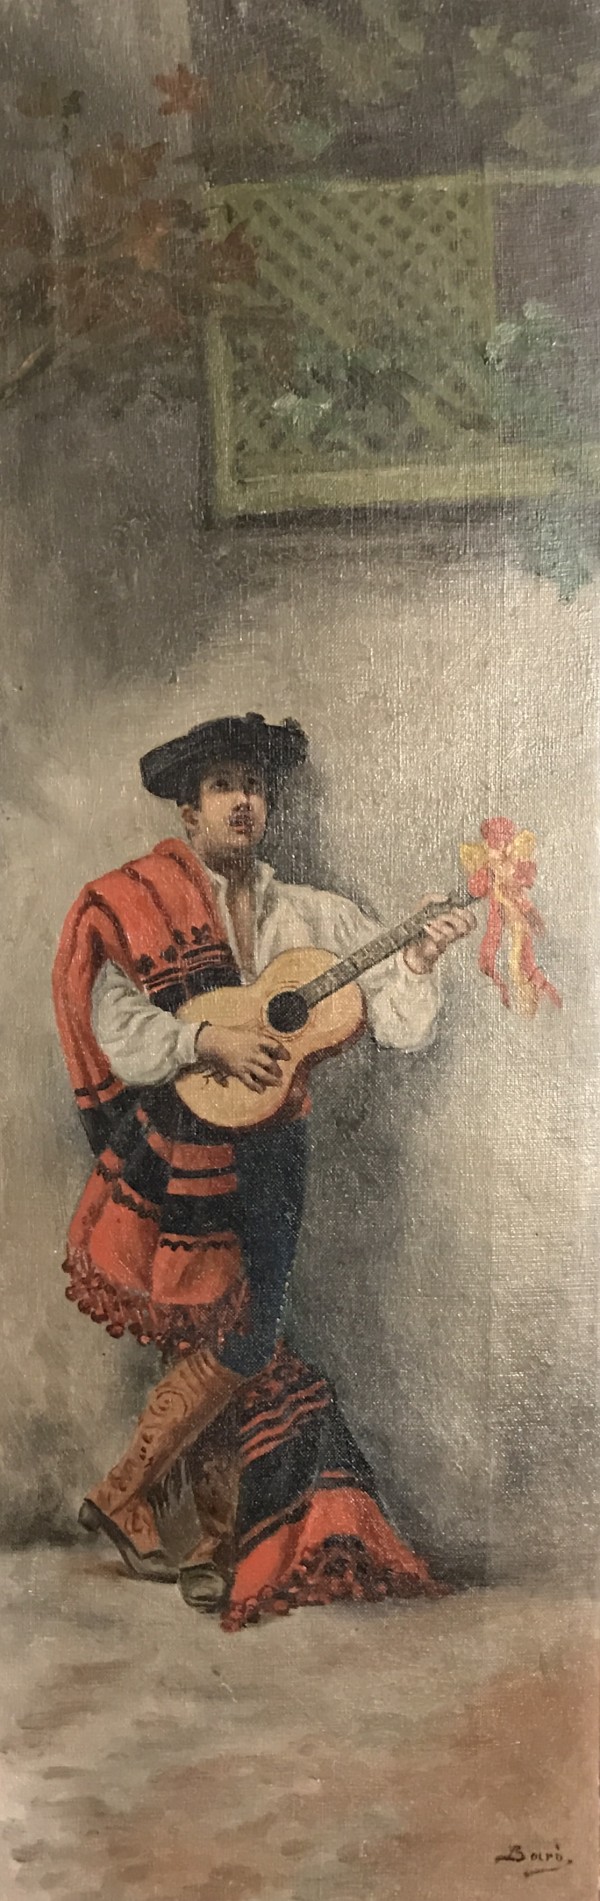 Spanish Guitar Player by - Bolro